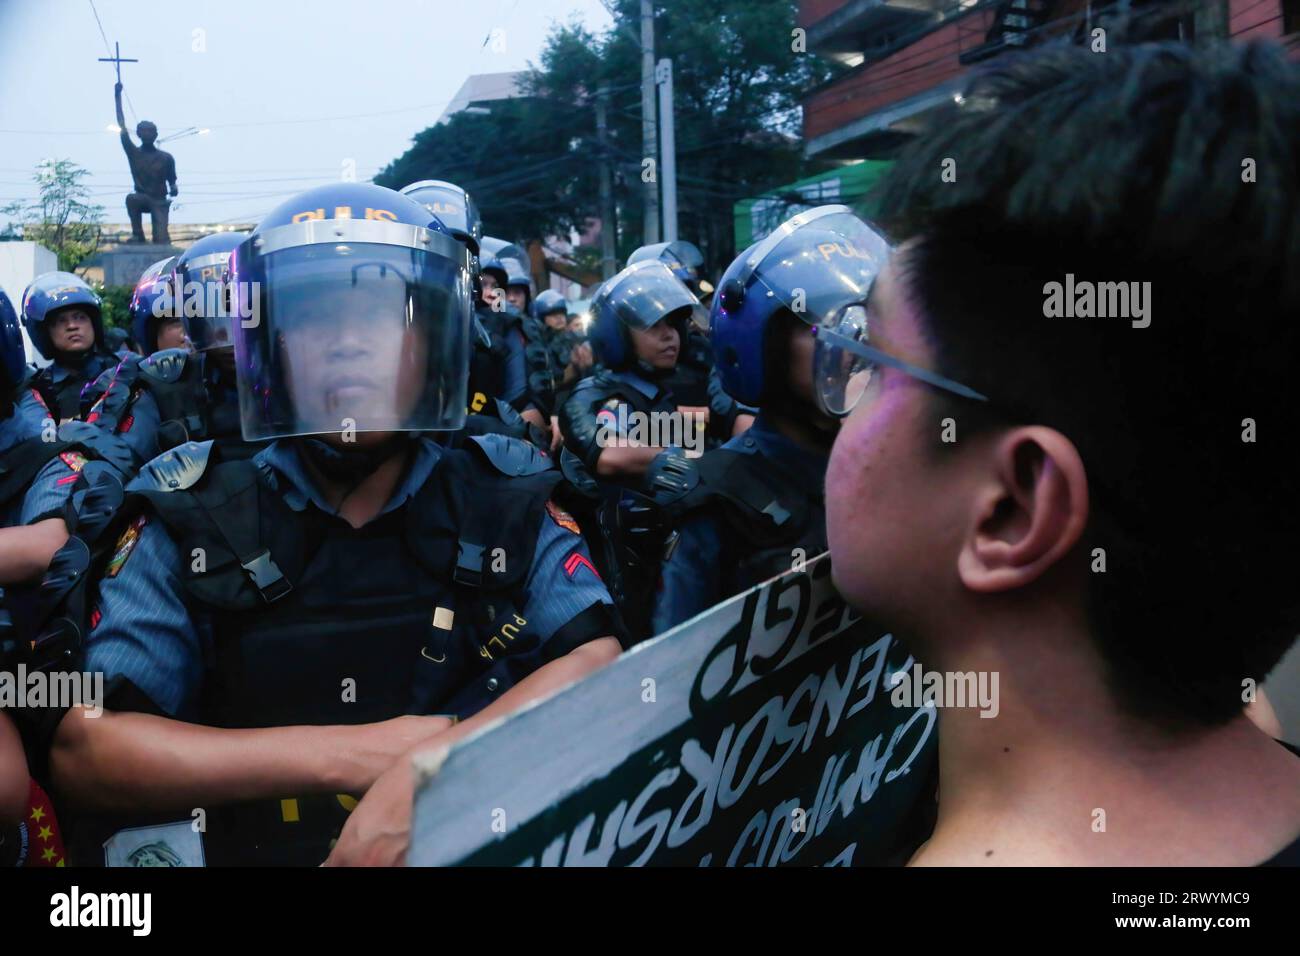 Protester faces a line of police officers during the demonstration. Extremists marched in Manila to mark the 51st anniversary of the declaration of Martial Law in the Philippines by the late dictator Ferdinand Emmanuel Edralin Marcos Sr. The Martial Law marked as tumultuous phase in Philippine history. Former President Marcos placed the entire Philippines under Martial Law that lasted from September 21, 1972 to January 17, 1981. During that time, Marcos cracked down on dissent and imprisoned thousands of his political critics. The dictator's family, with the power of Ferdinand Marcos Jr., a cu Stock Photo